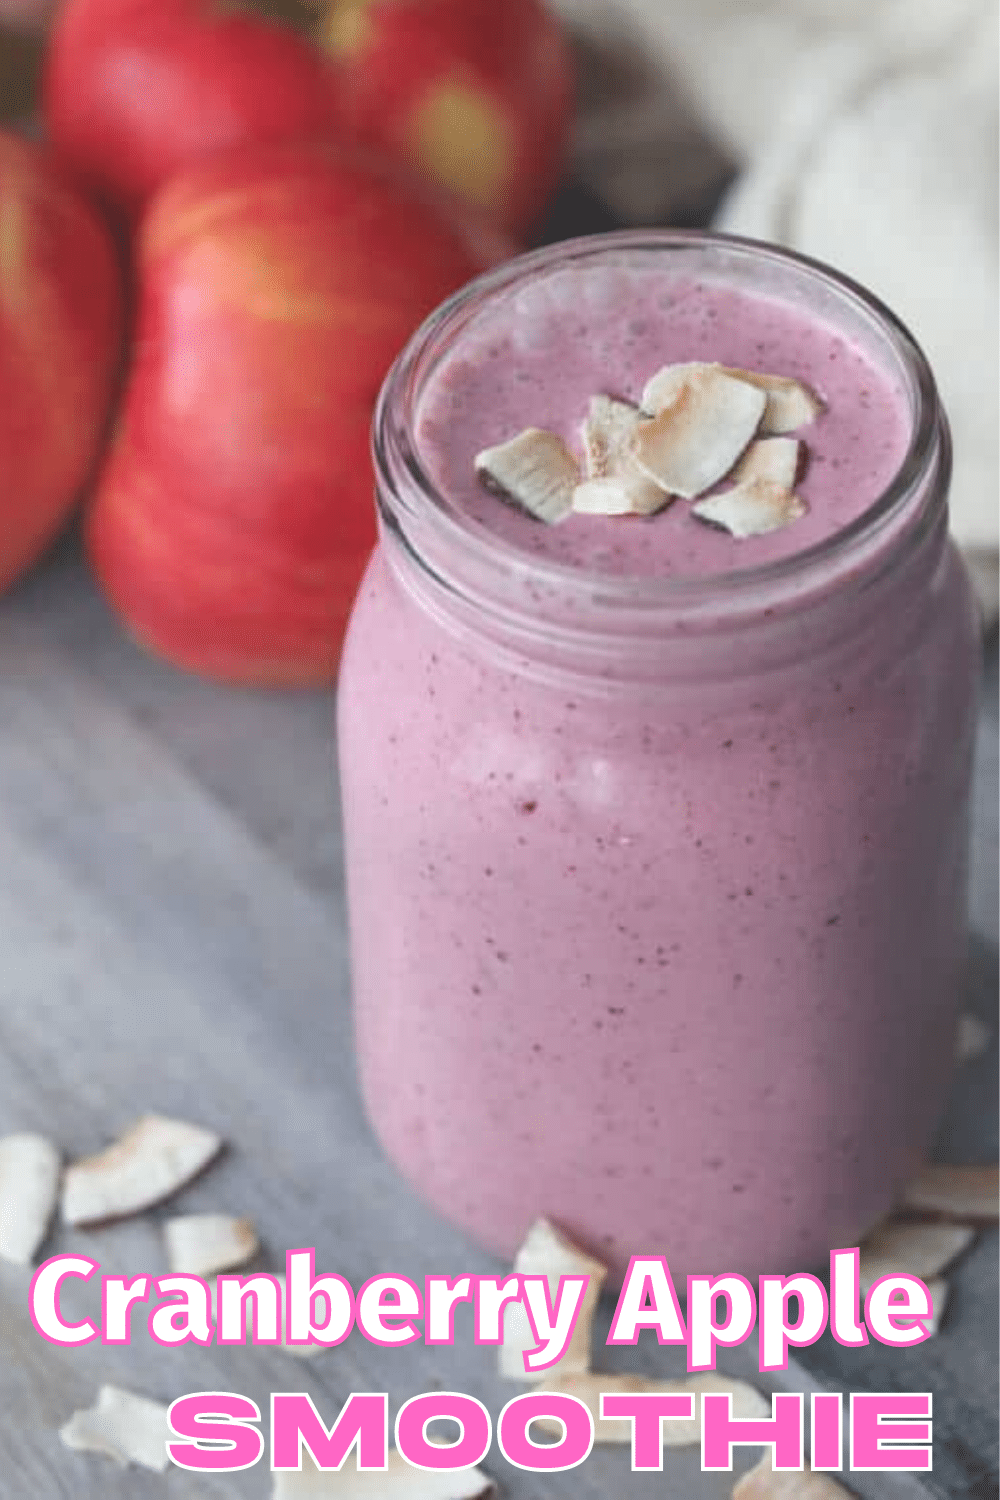 Cranberry apple smoothie: a delightful blend of cranberries and apples that creates a refreshing and healthy beverage option.